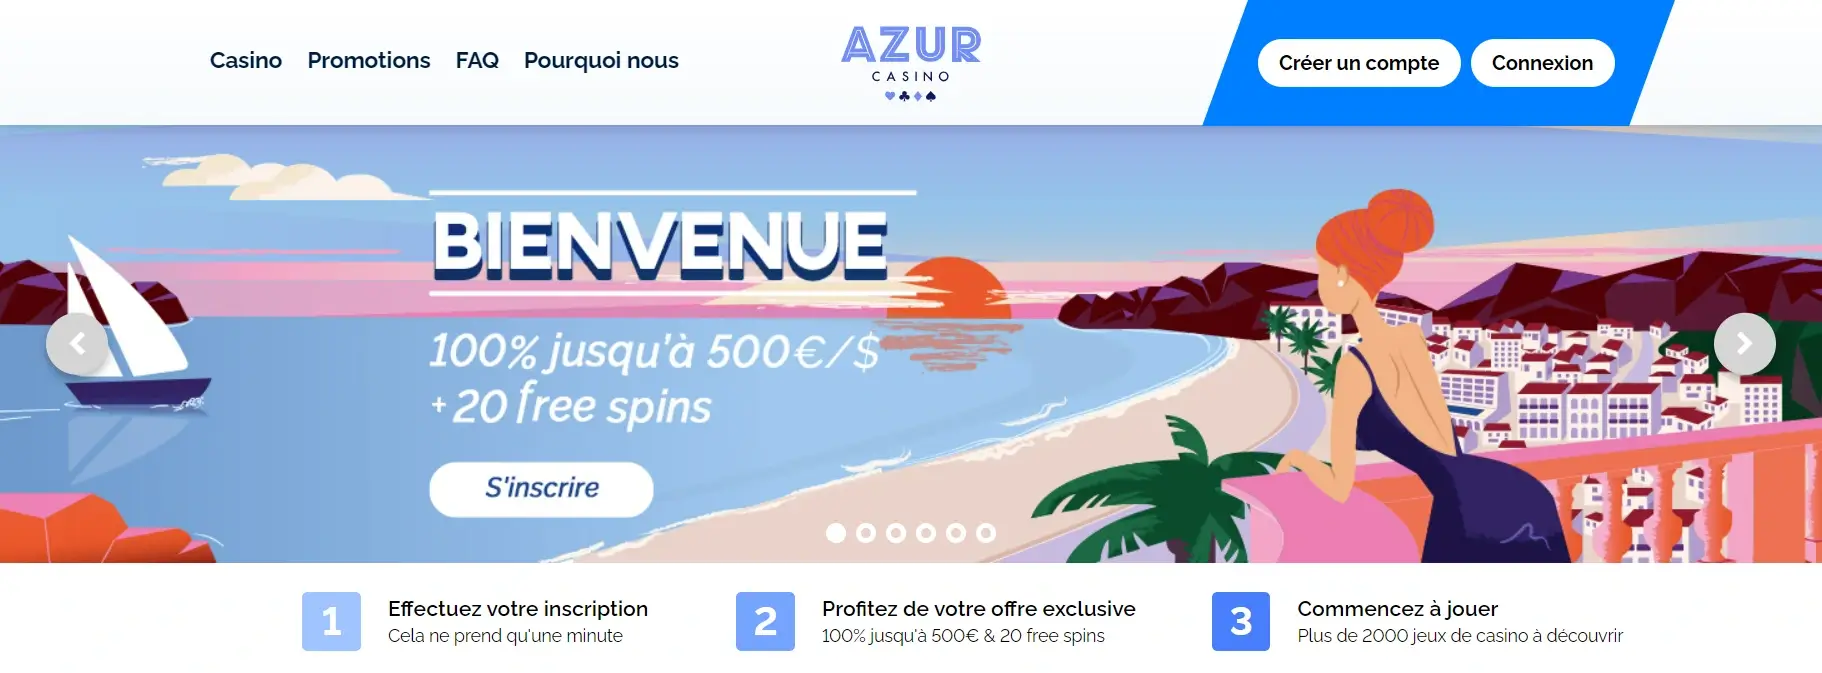 azur-casino-home-page-banner